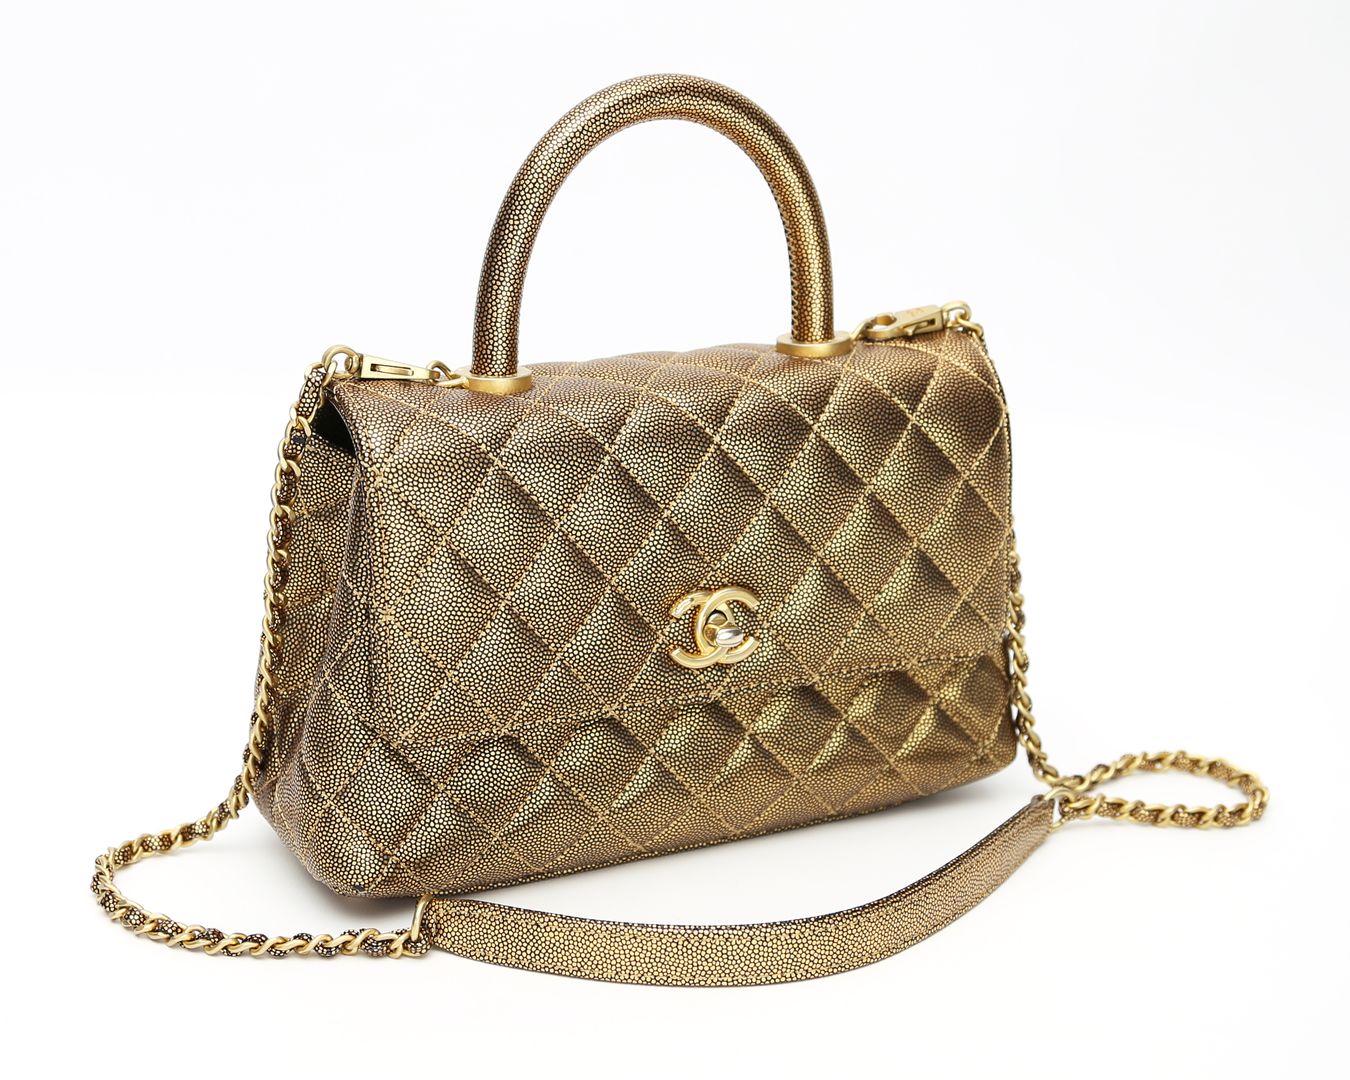 Handle Bag "Metallic Caviar Quilted Gold", Chanel.